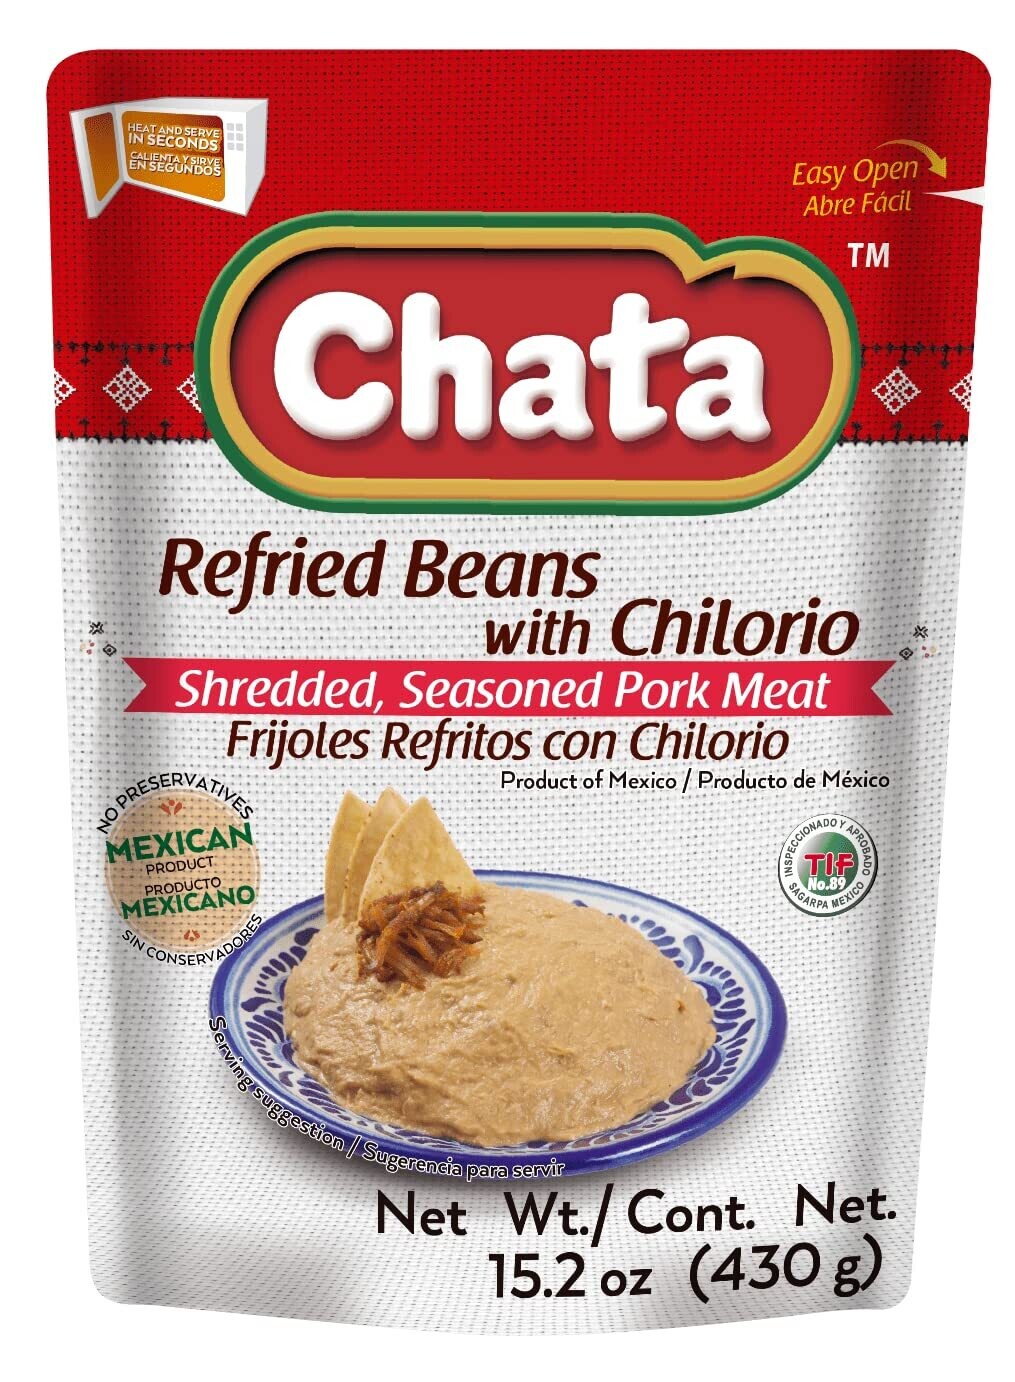 Chata Refried Beans with Chilorio (contains pork)